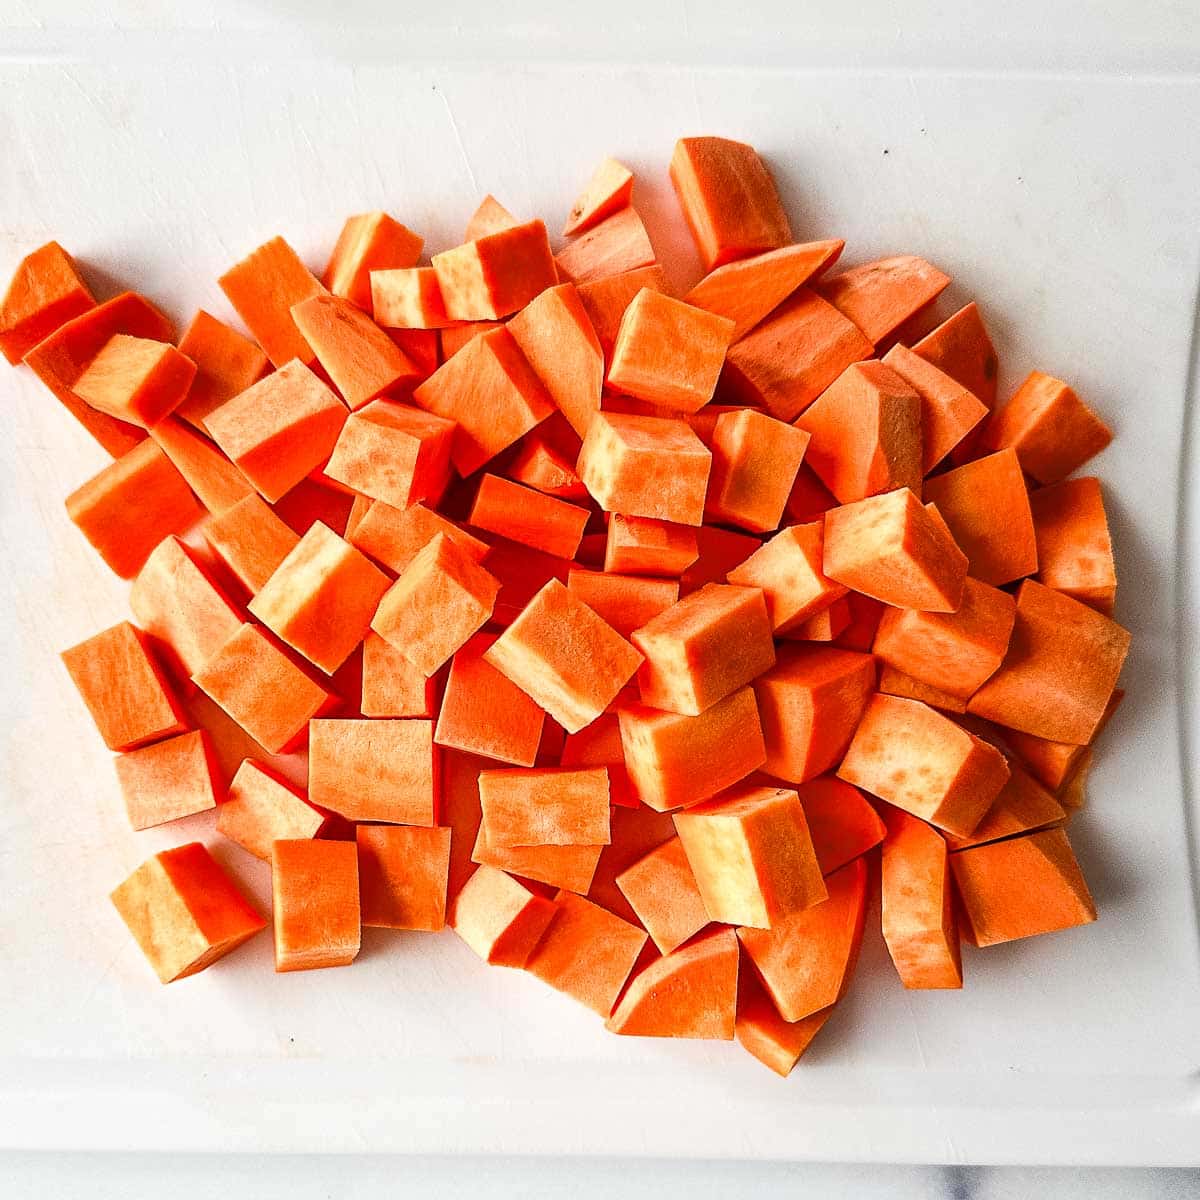 Chopped carrots on a cutting board.